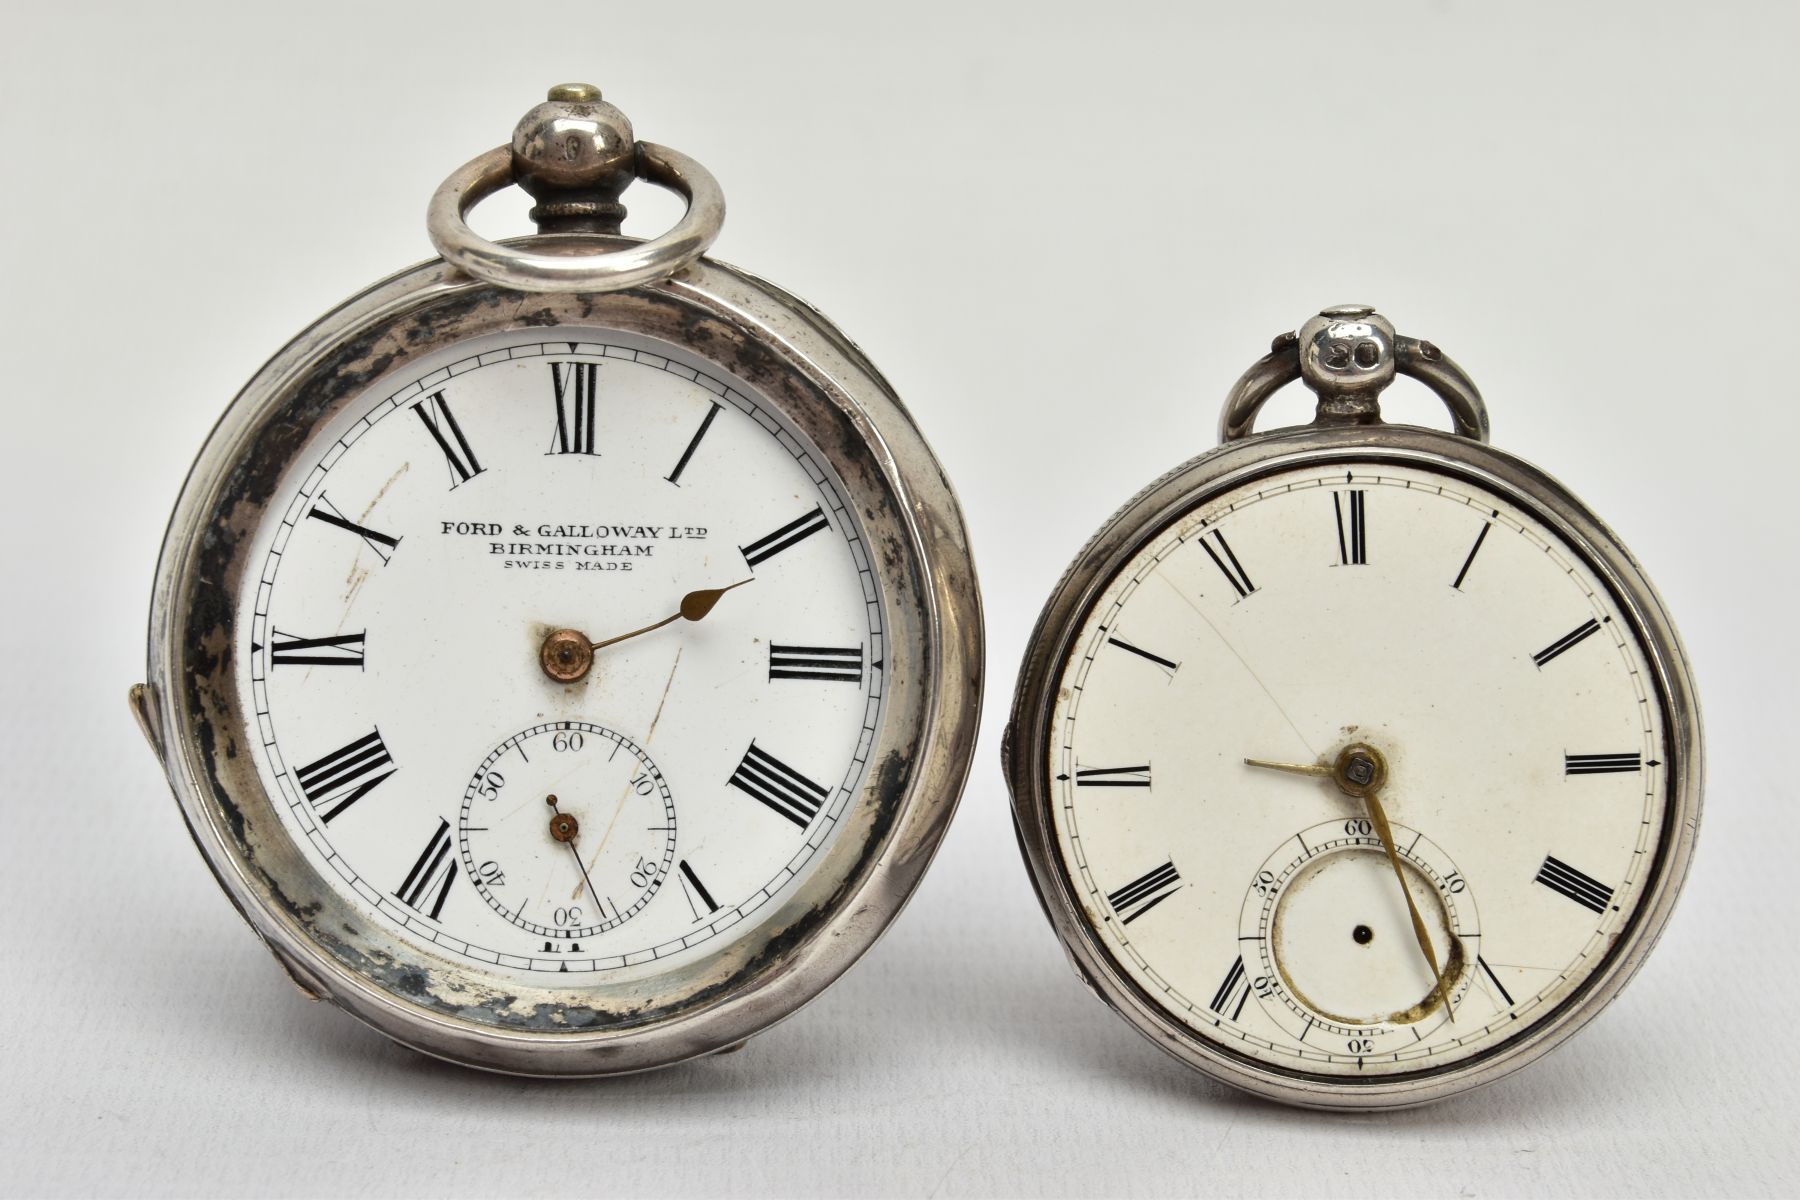 TWO SILVER POCKET WATCHES, the first with an open face, circular white dial, Roman numerals,